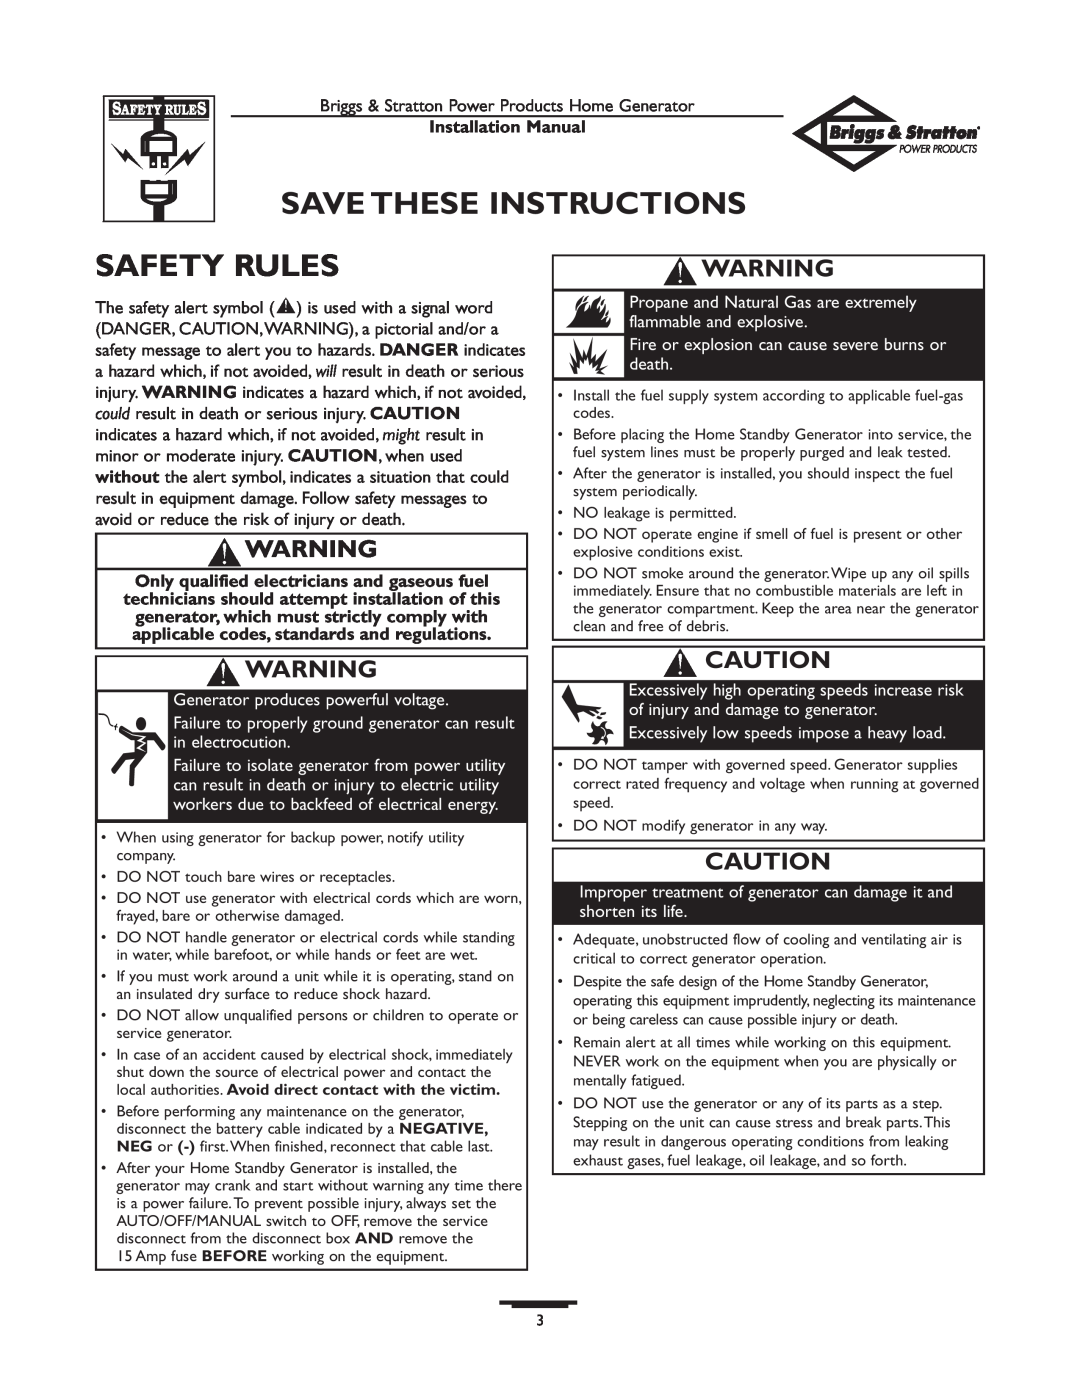 Briggs & Stratton 01938-0 manual Save These Instructions, Safety Rules, Installation Manual 